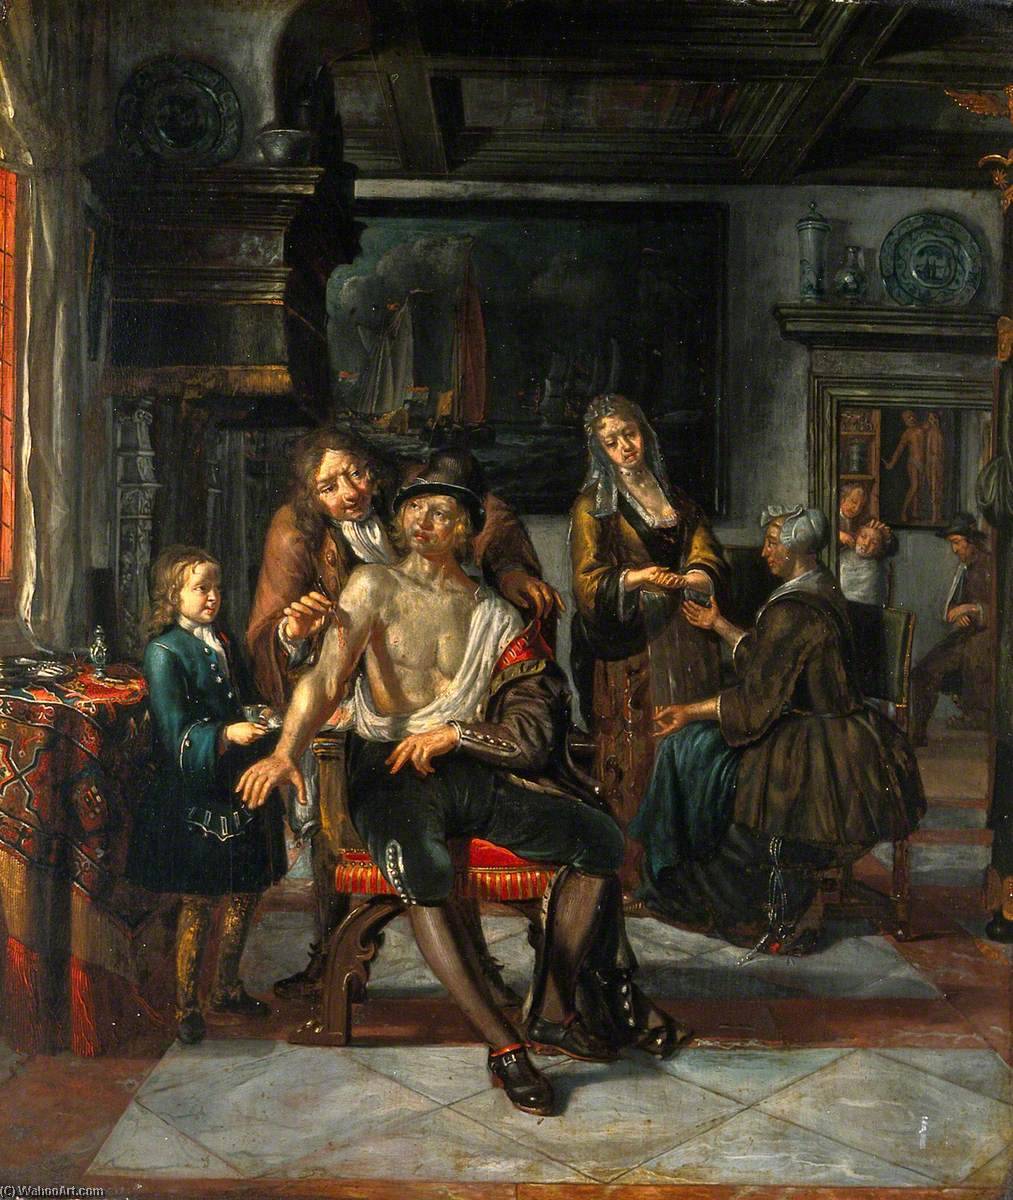 WikiOO.org - دایره المعارف هنرهای زیبا - نقاشی، آثار هنری Matthijs Naiveu - Interior of a Surgery with a Surgeon Treating a Wound in the Arm of a Man, with a Boy and Five Other Figures